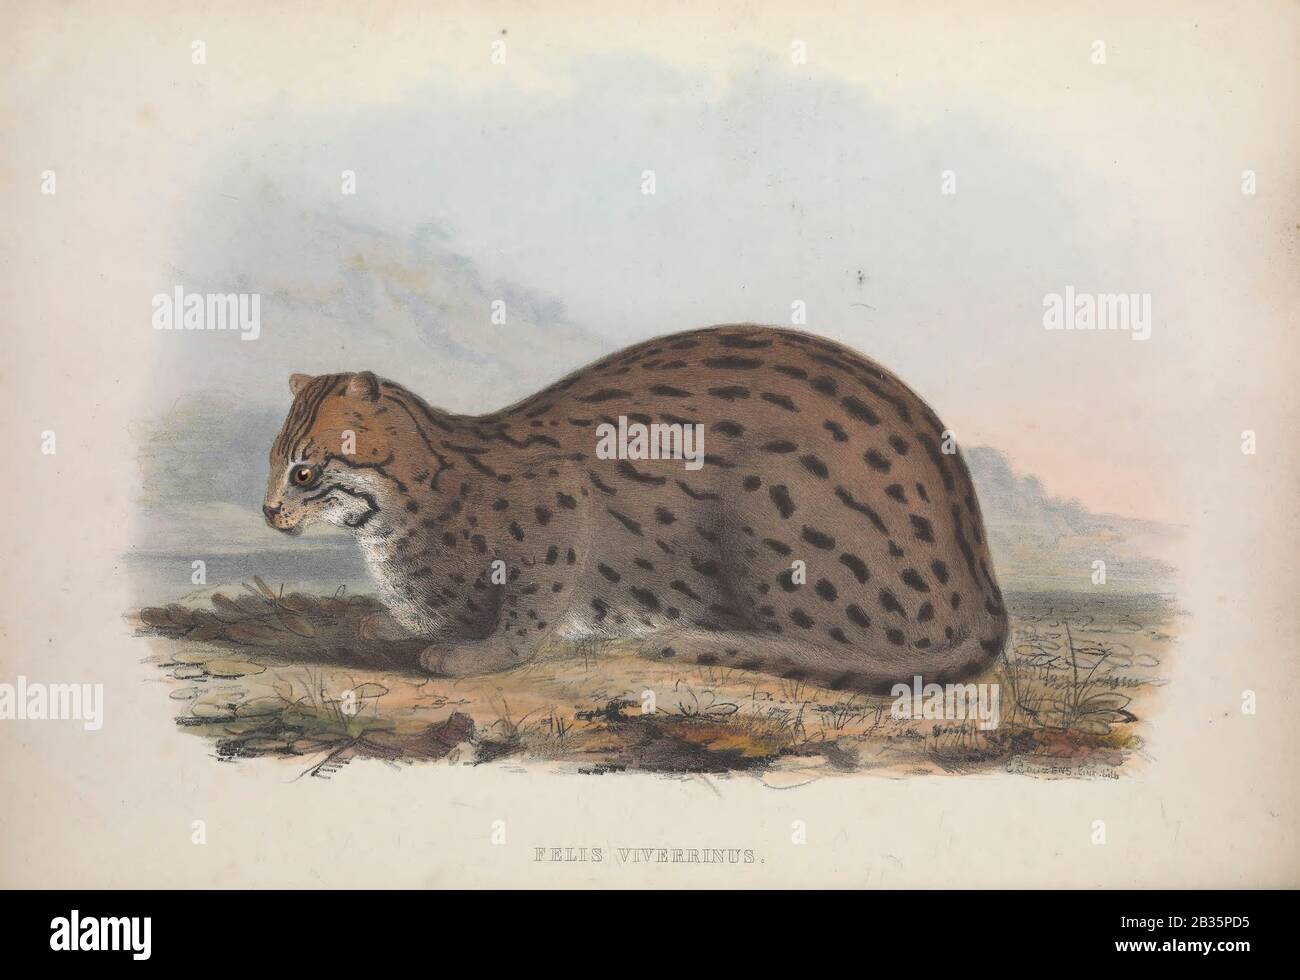 fishing cat (Prionailurus viverrinus) From the book Zoologia typica; or,  Figures of new and rare animals and birds described in the proceedings, or  exhibited in the collections of the Zoological Society of